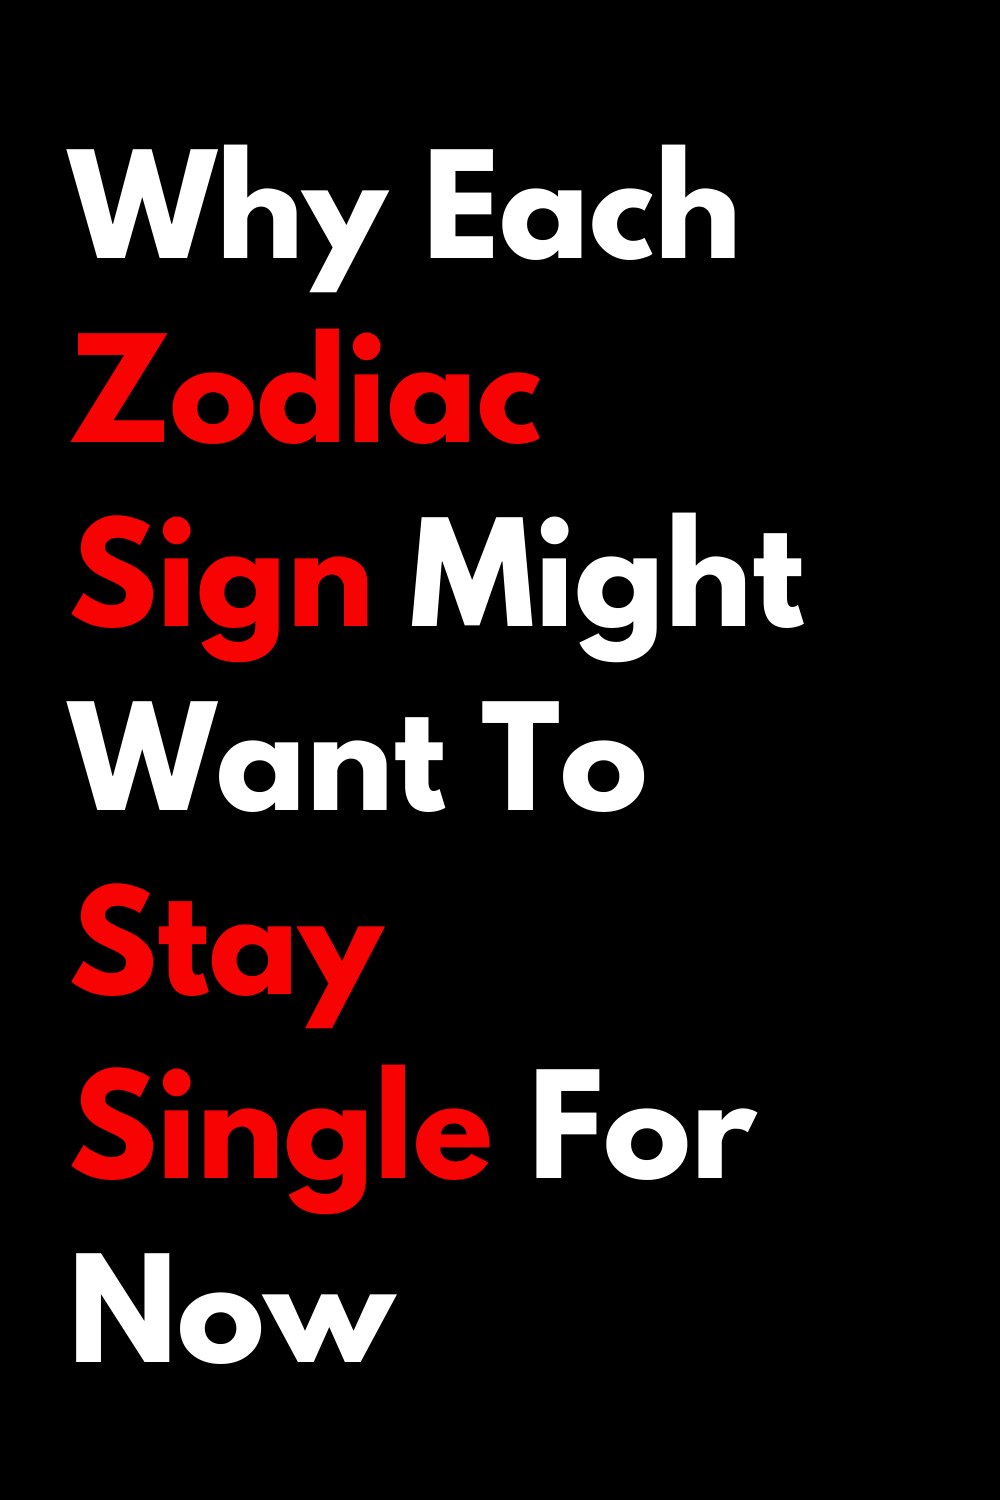 Why Each Zodiac Sign Might Want To Stay Single For Now